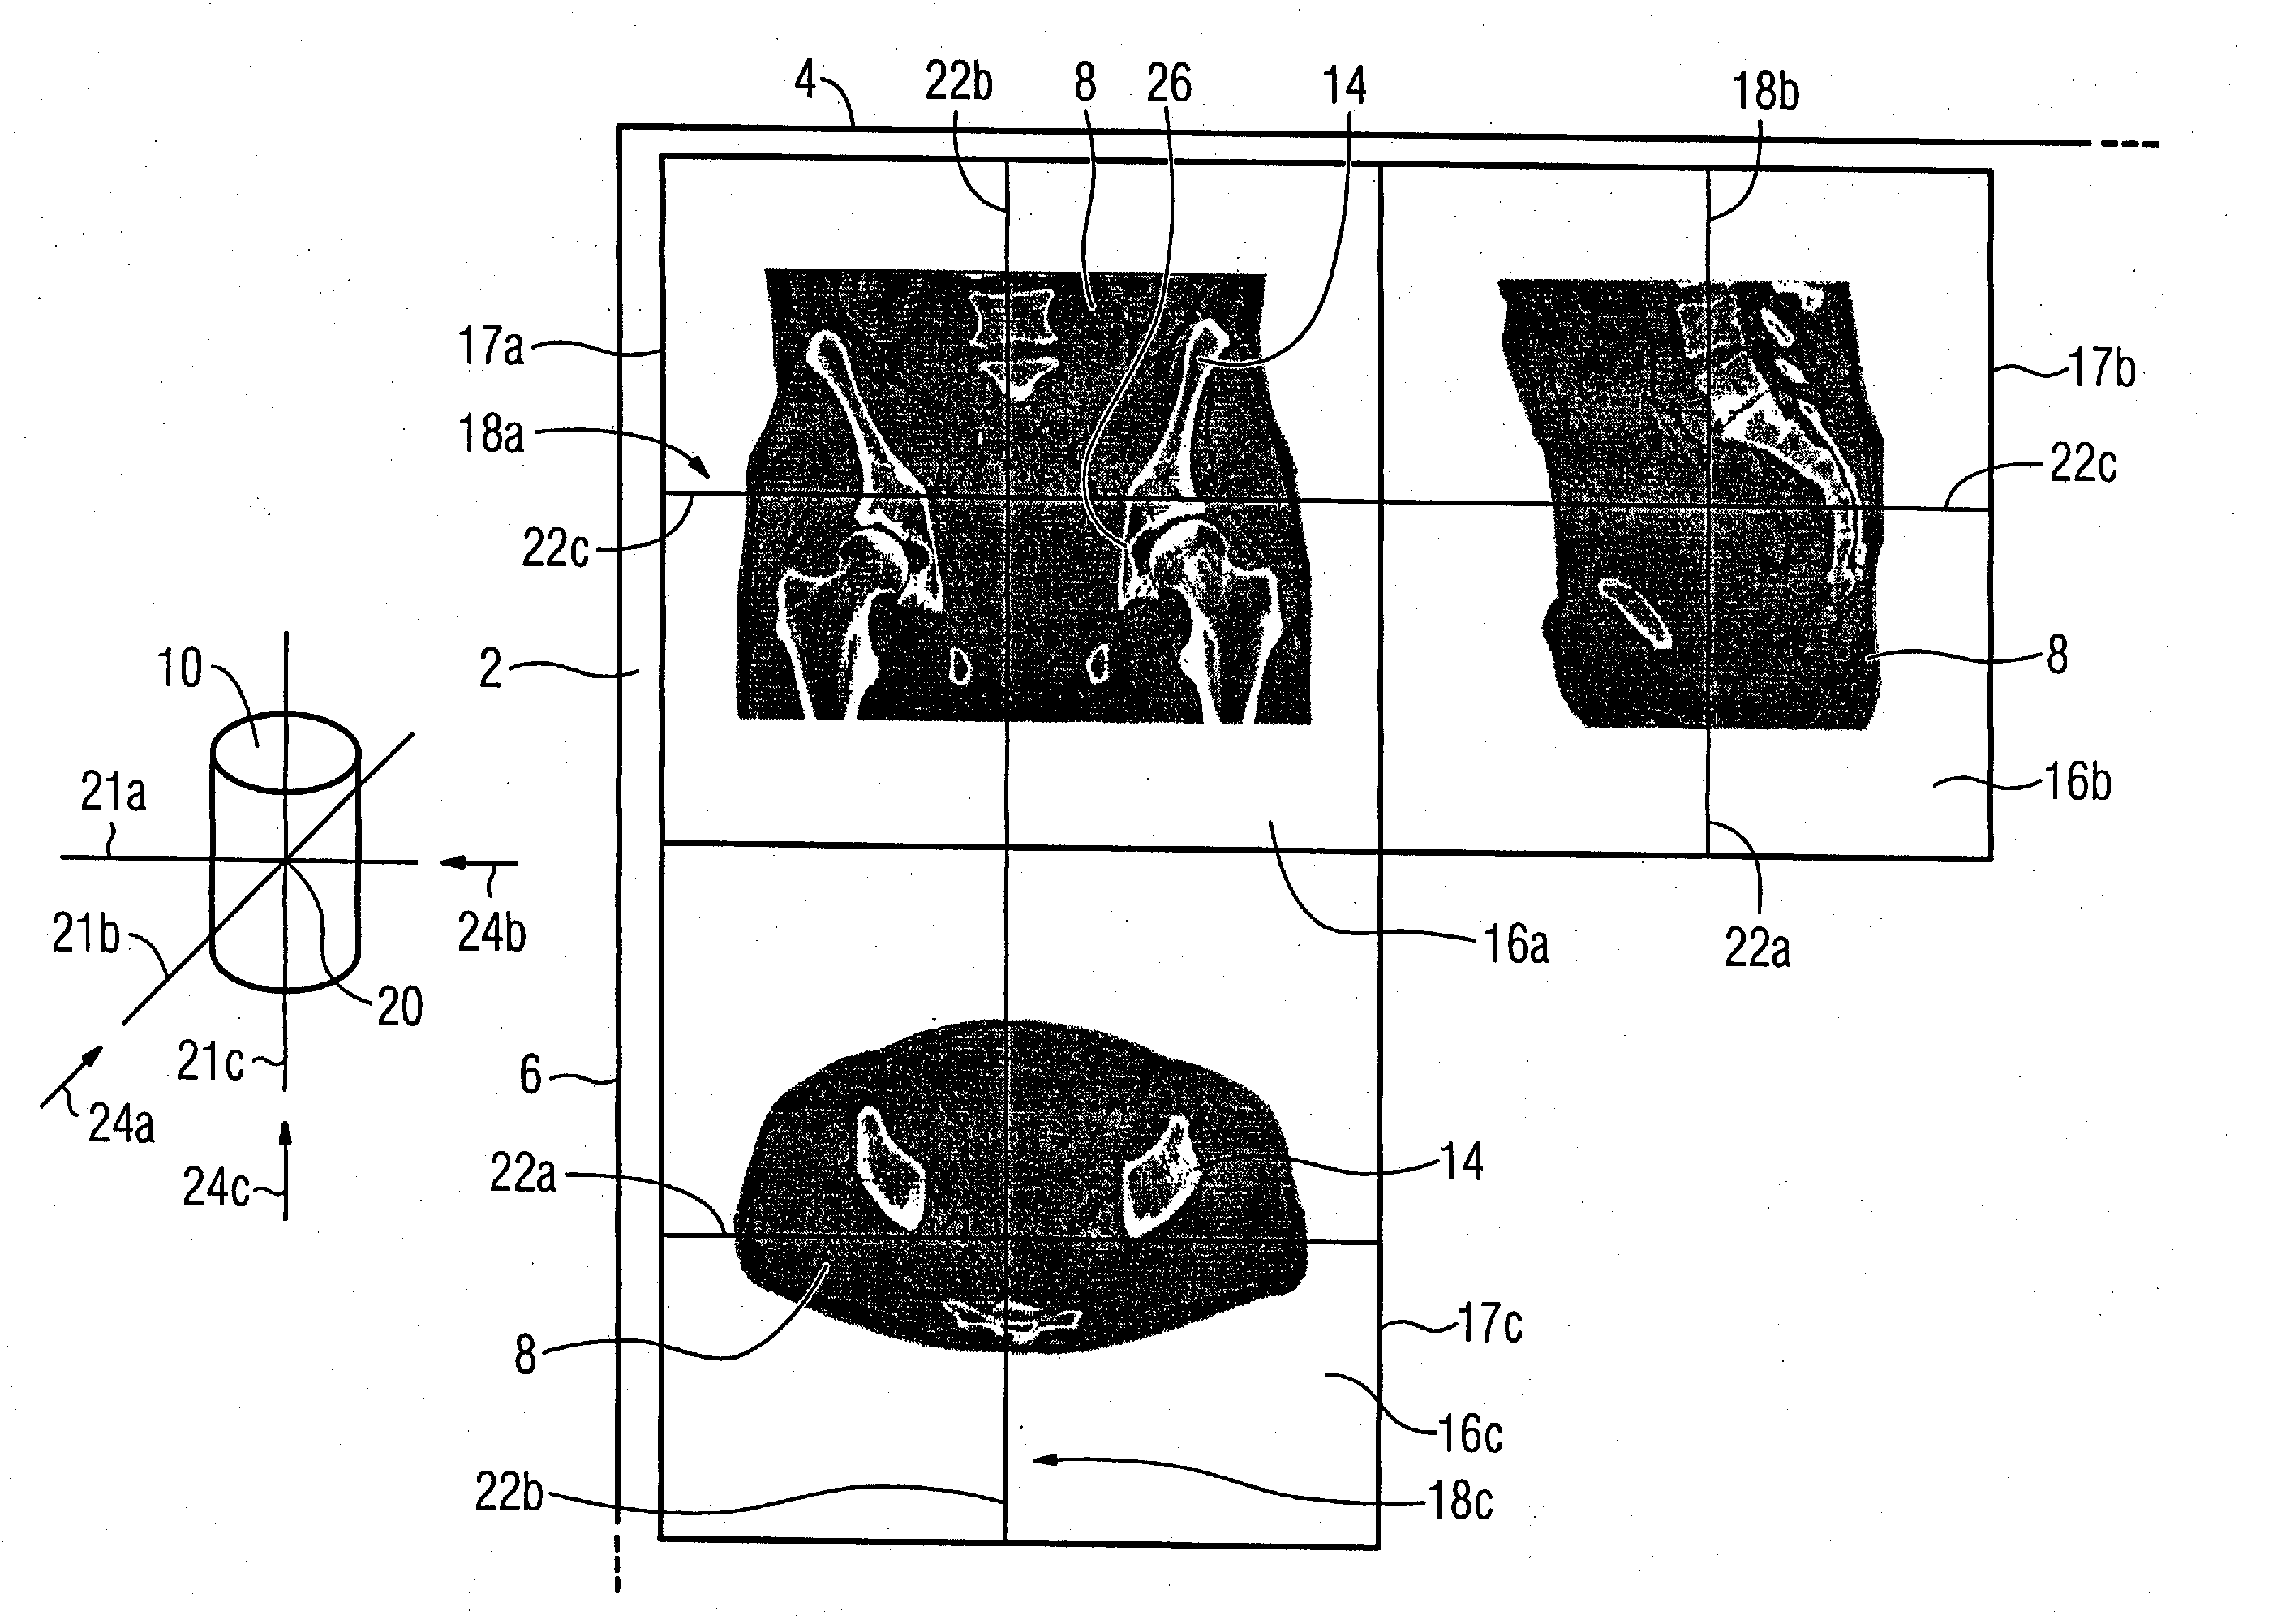 Method for display of medical 3D image data on a monitor